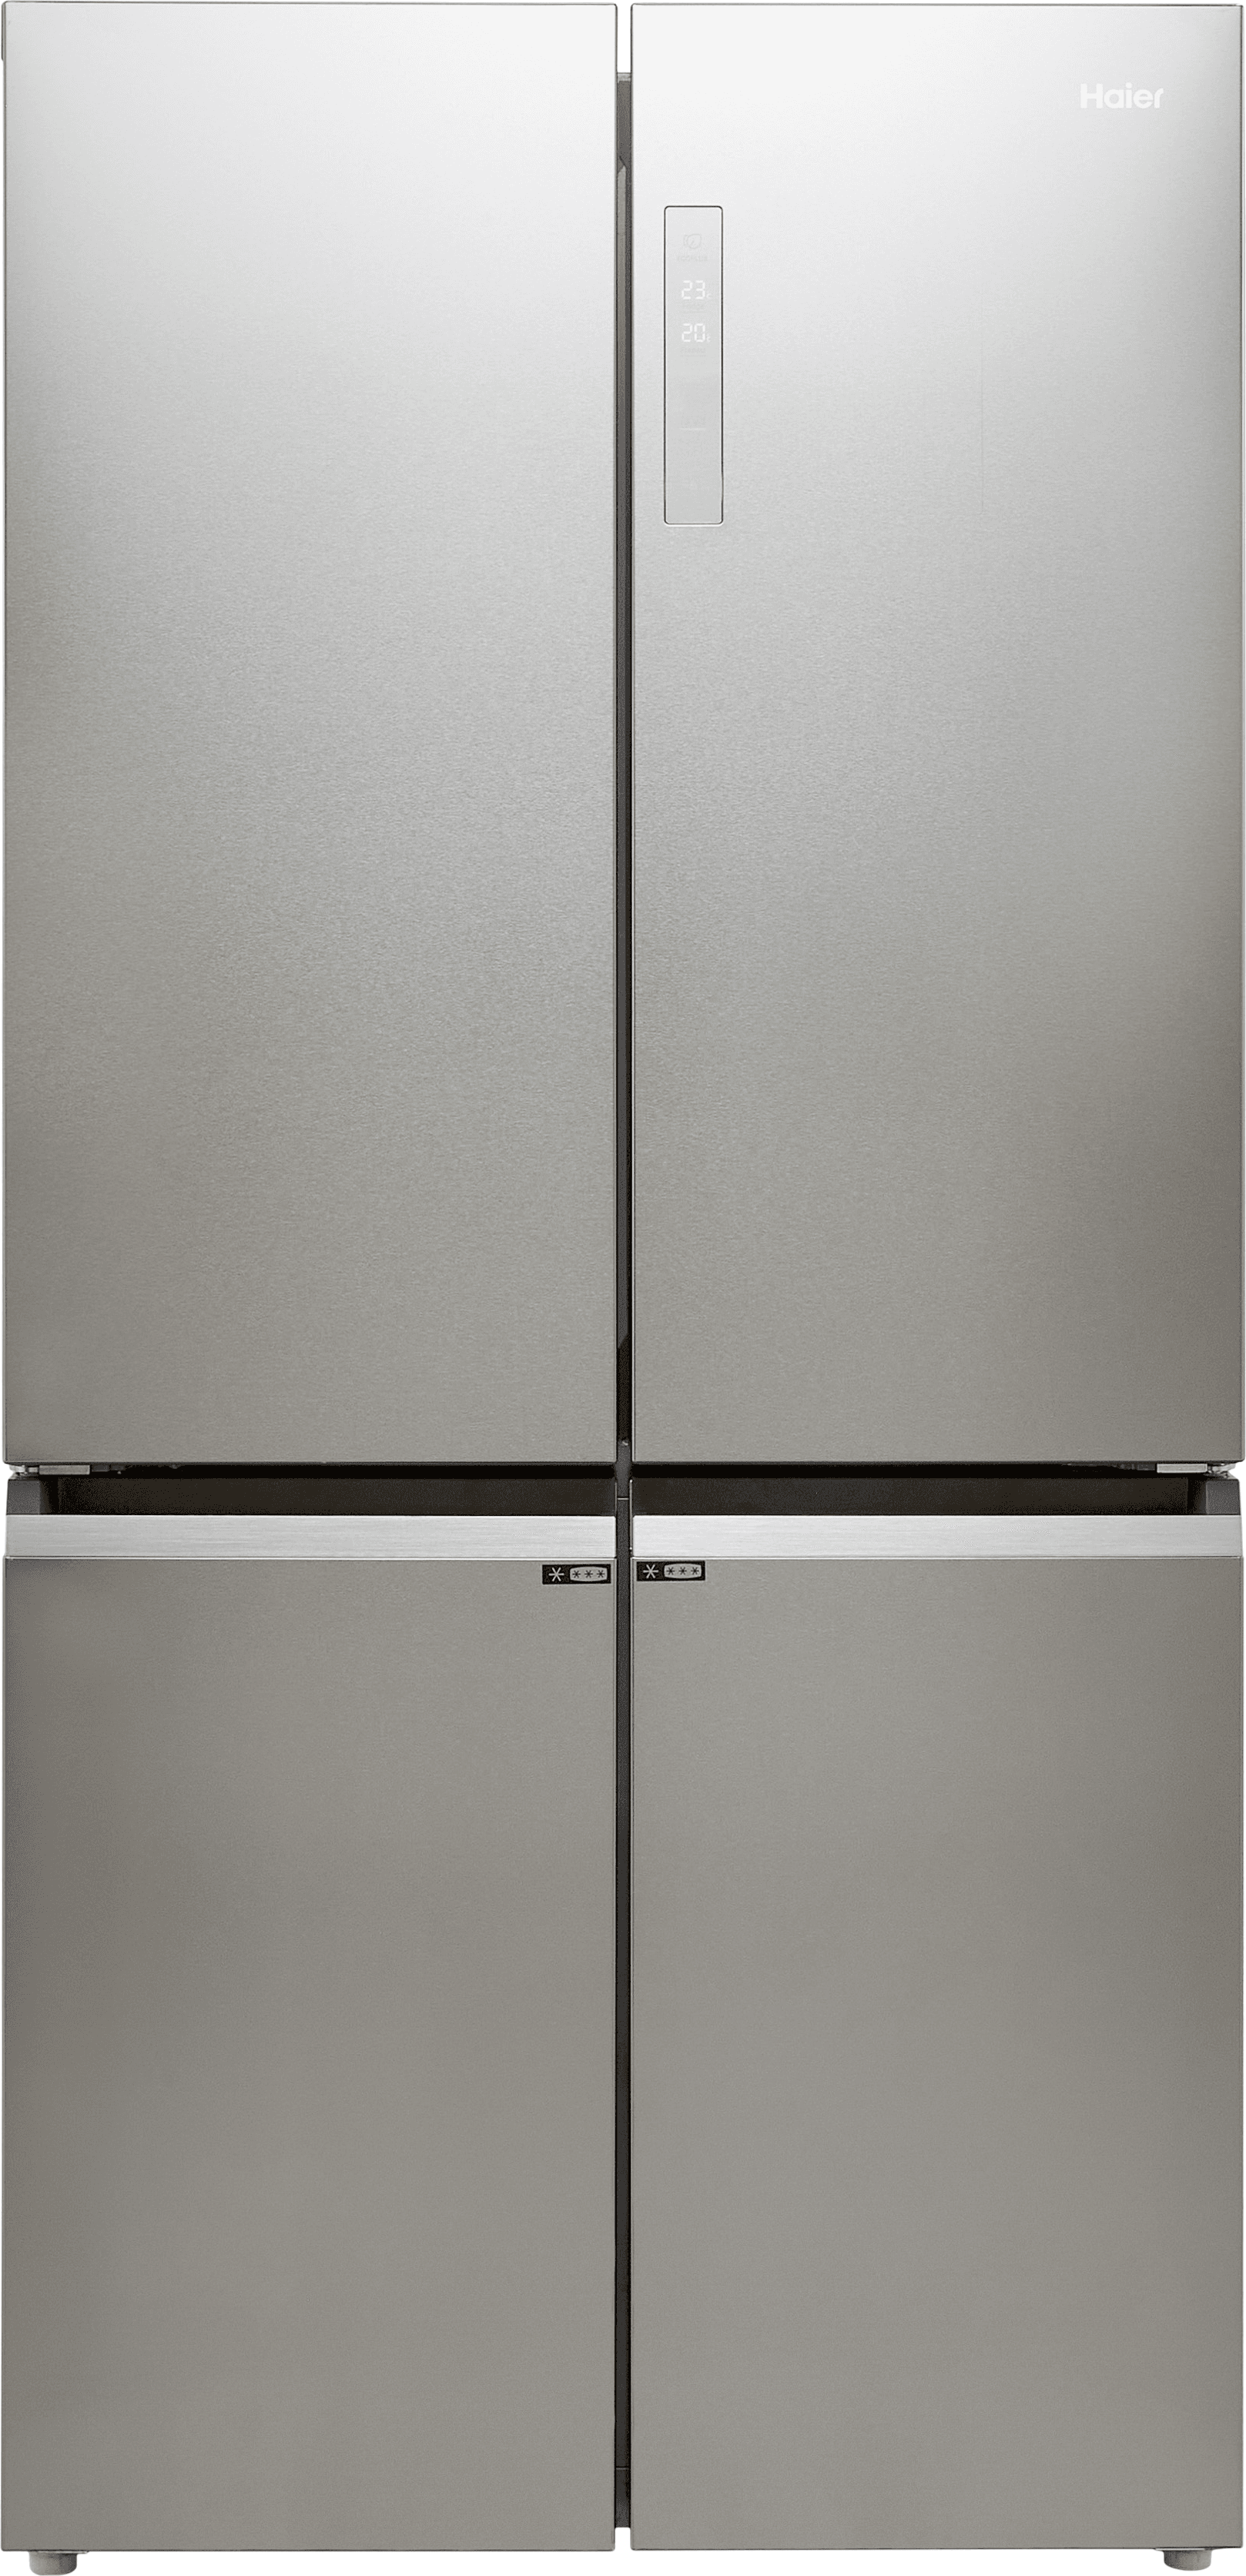 Haier Slim Depth Cube HTF-540DP7 Non-Plumbed American Fridge Freezer with Humidity Zone, Total No Frost, T-ABT Technology, Stainless Steel